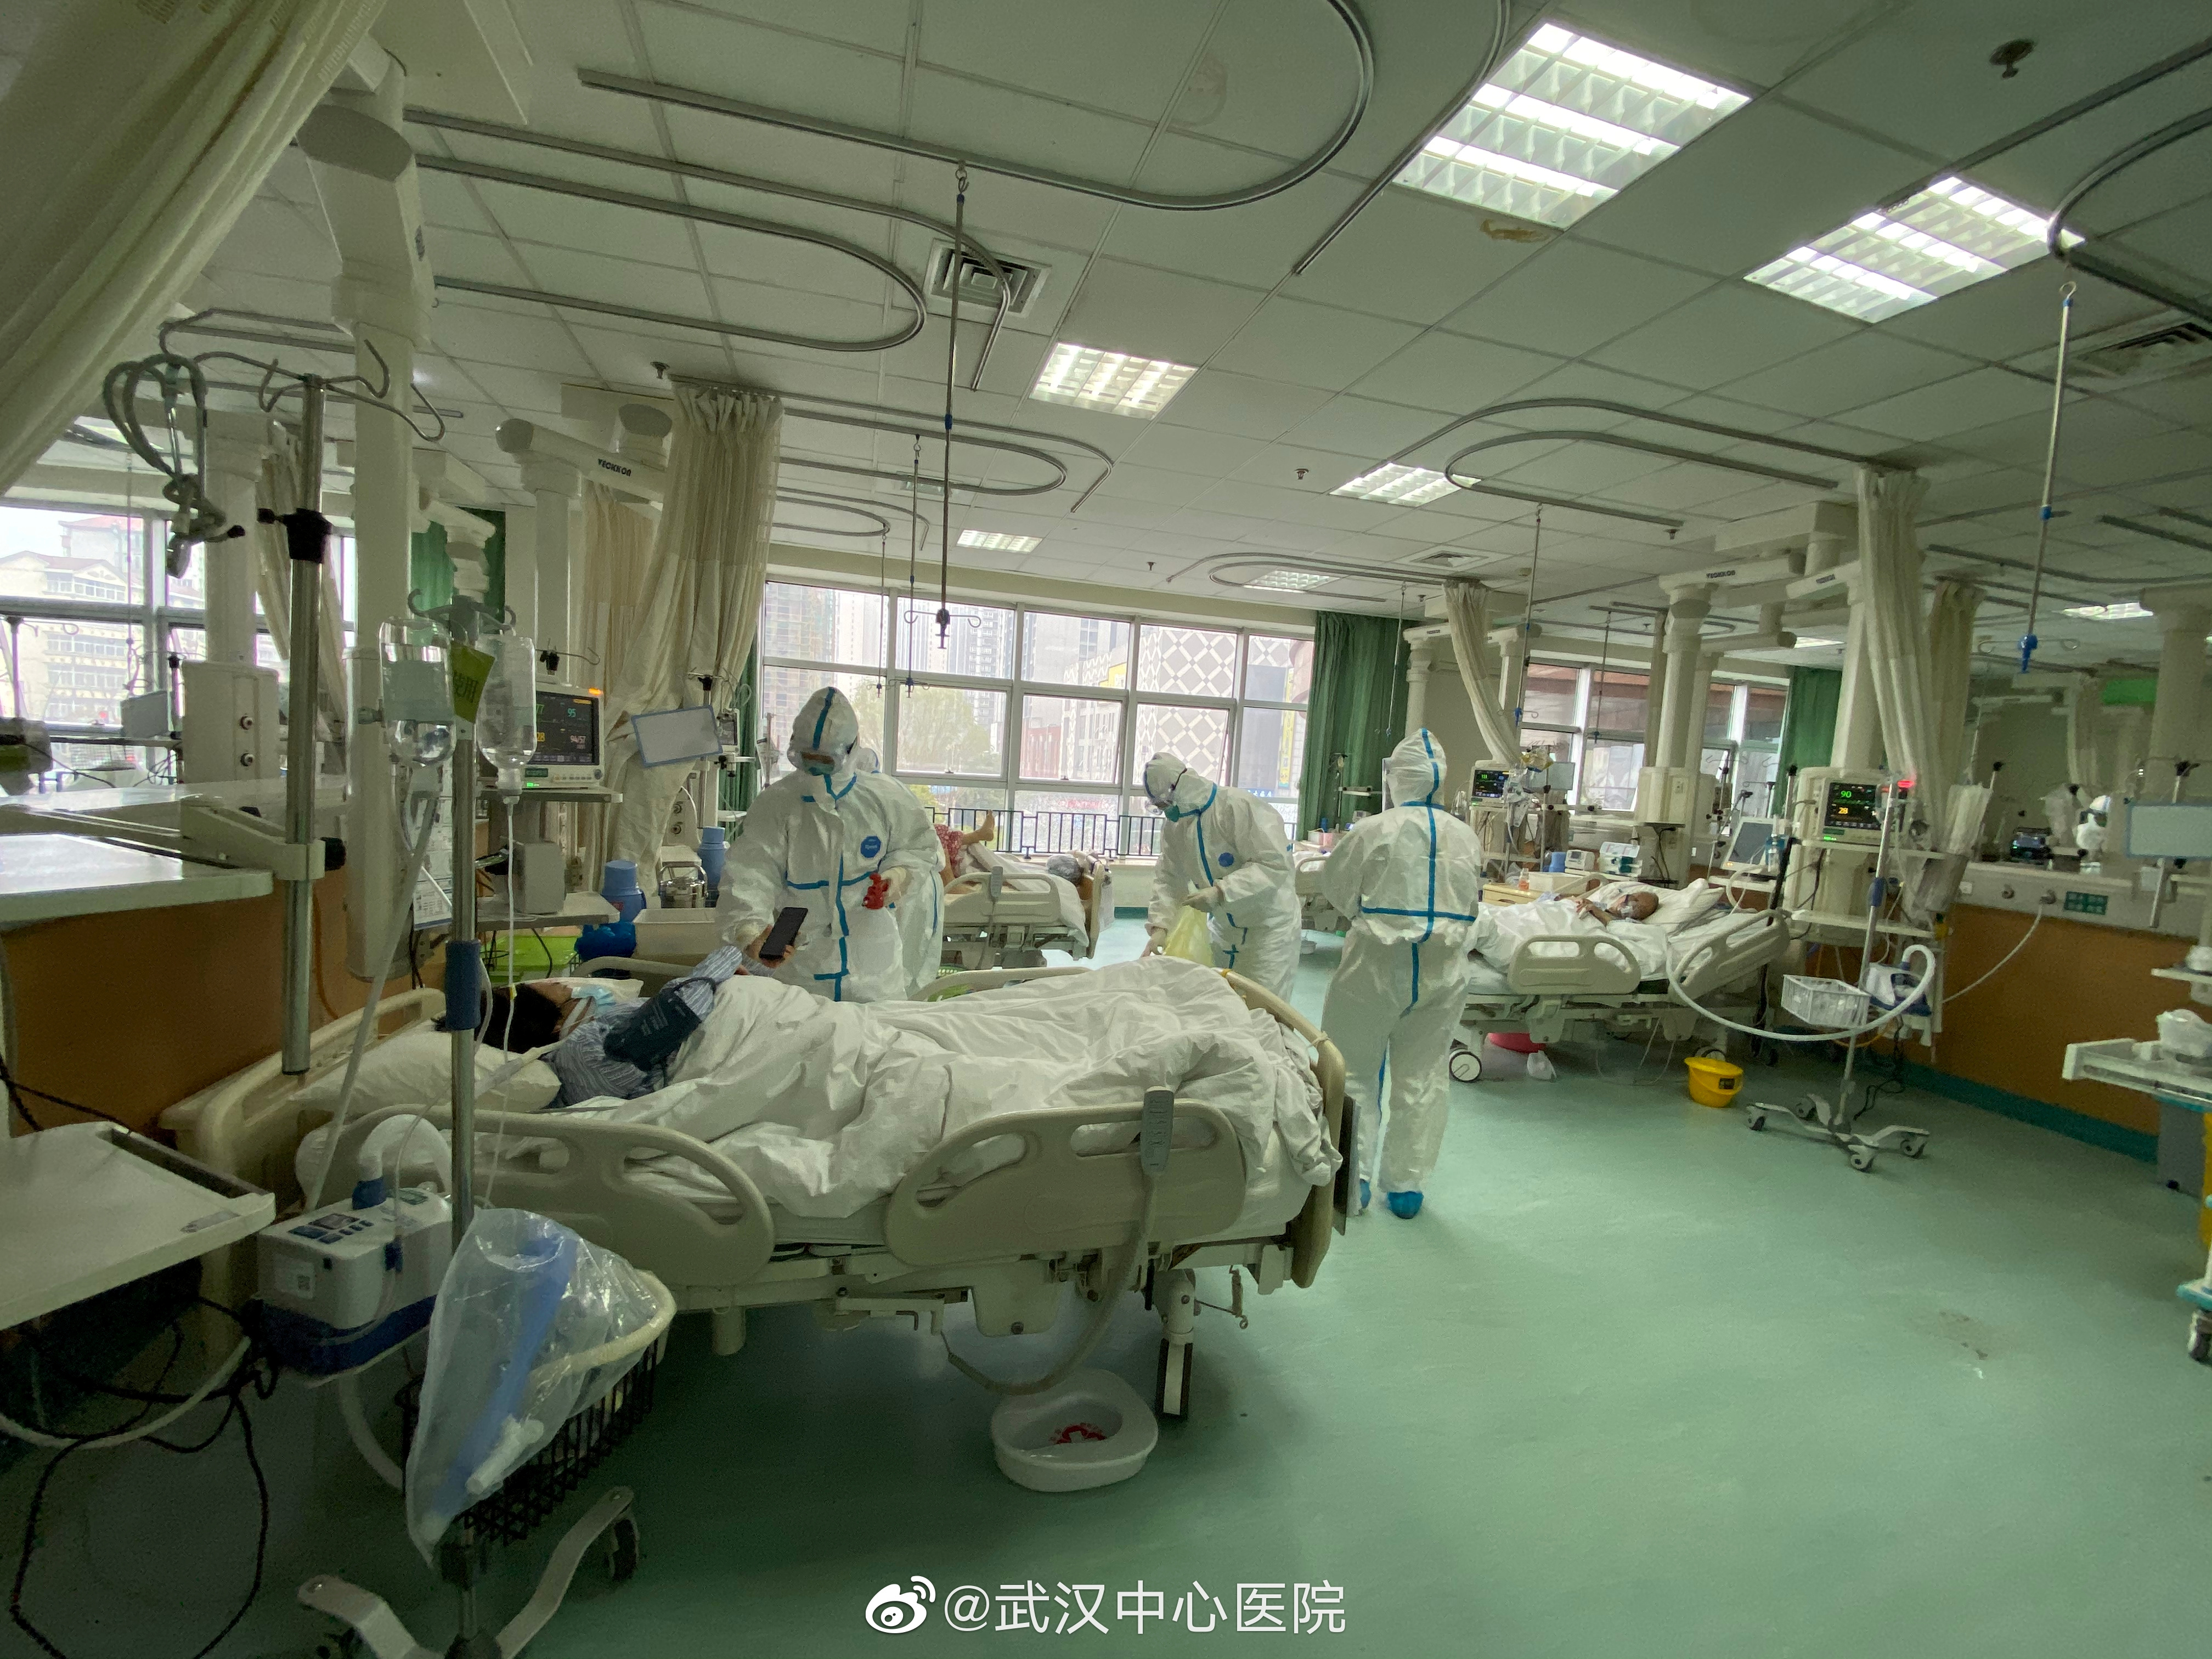 Pictures uploaded to social media on January 25, 2020 by the Central Hospital of Wuhan show medical staff attending to patients, in Wuhan, China. u00e2u20acu201d The Central Hospital Of Wuhan via Weibo via Reuters 